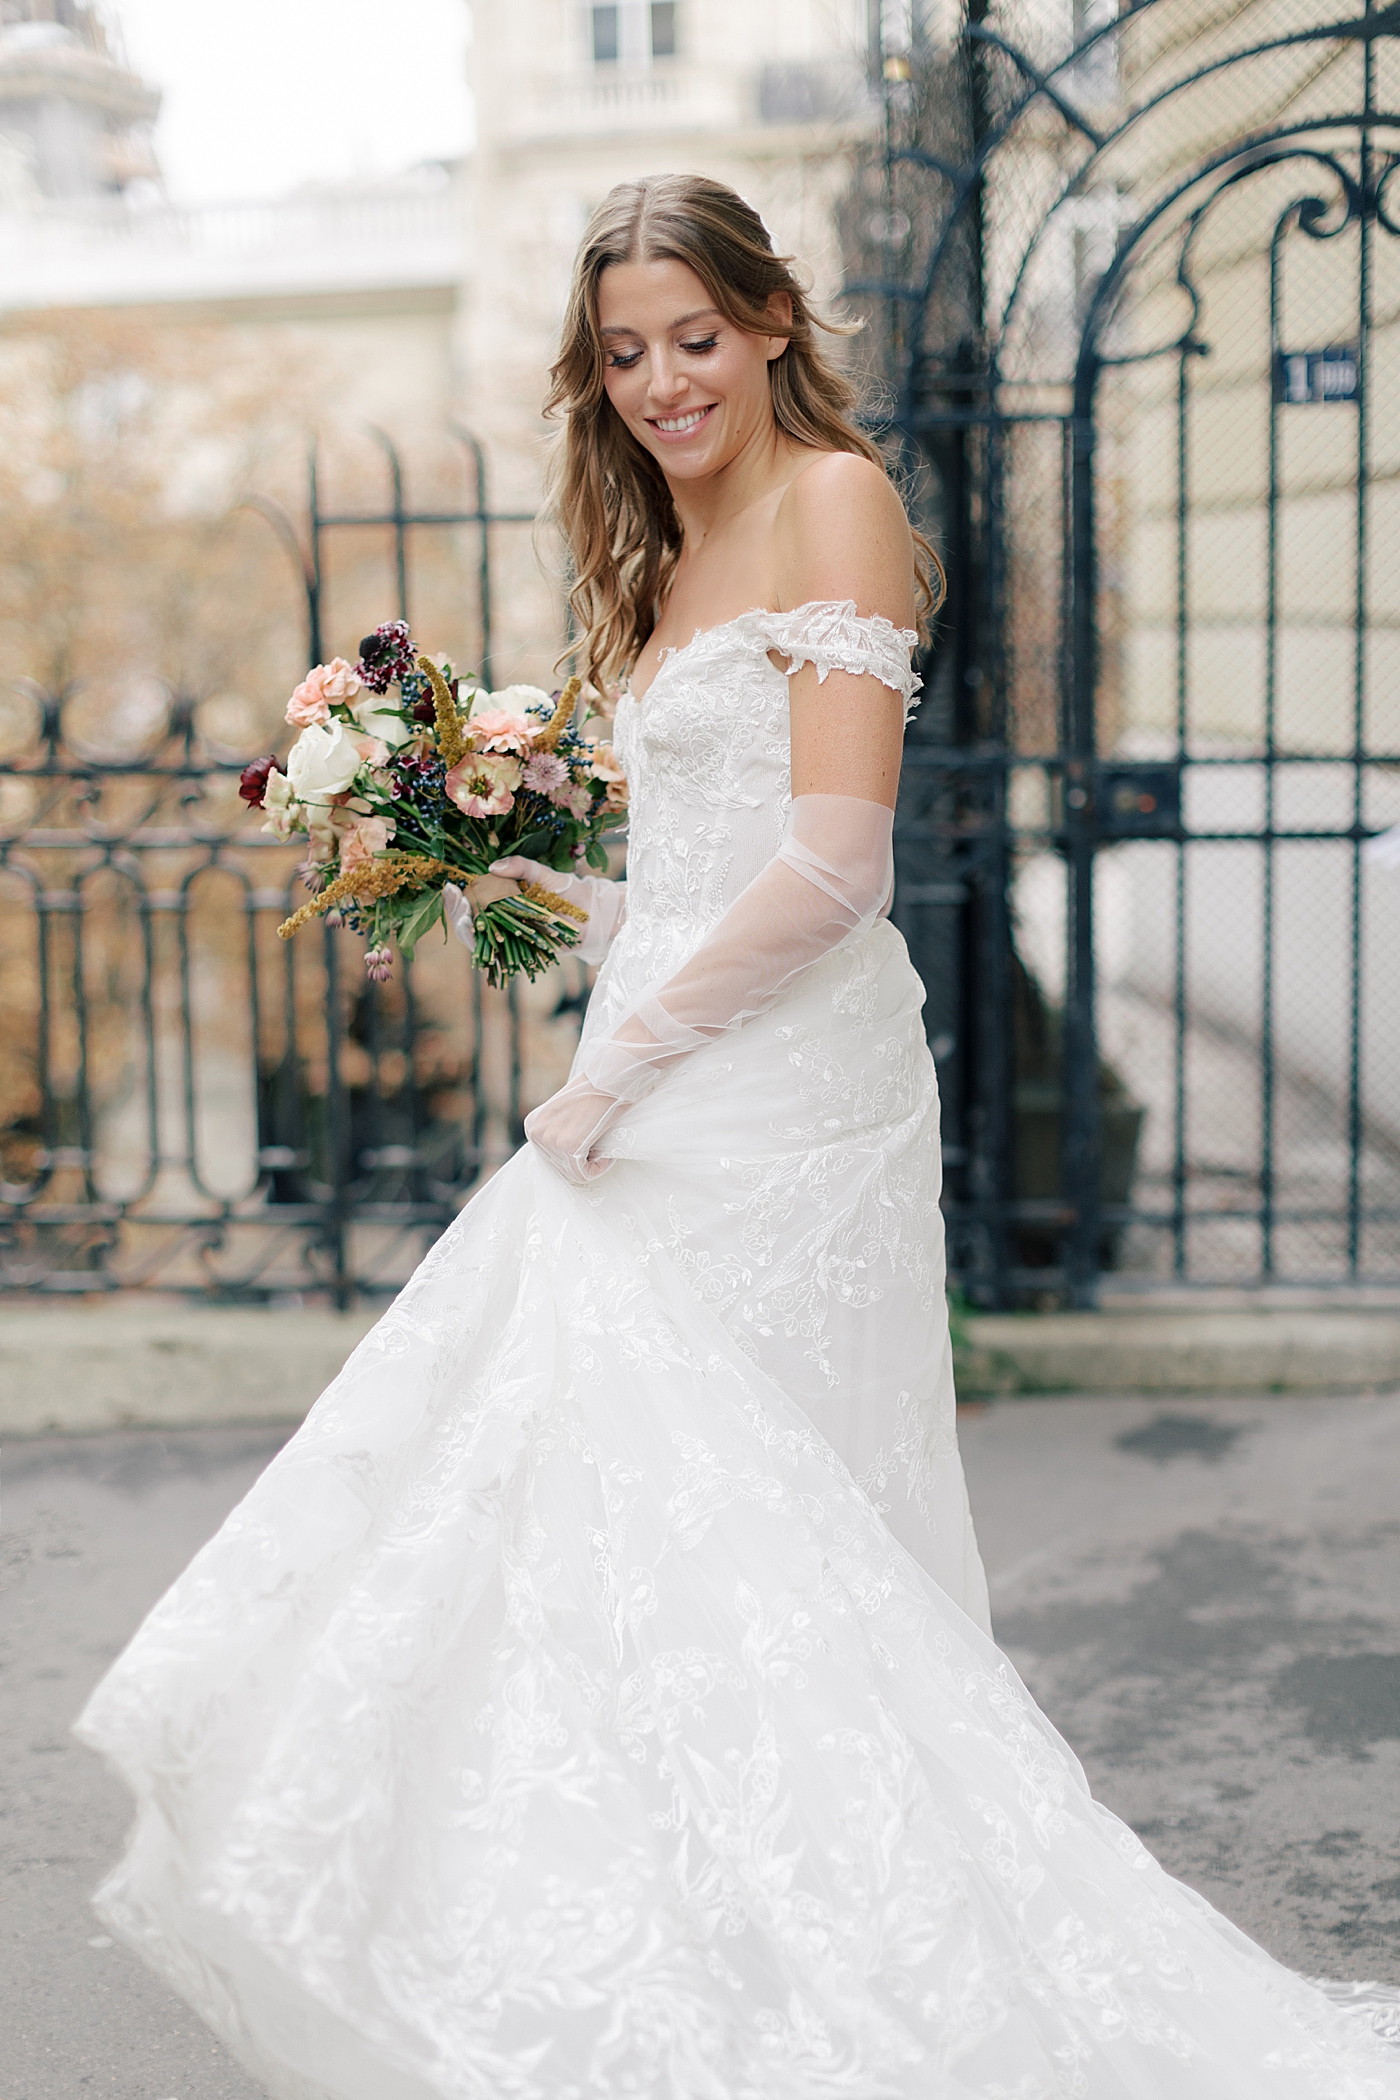 Bride holding a bouquet and twirling her dress on a street in Paris in front of an iron gate | Image by Hope Helmuth Photography